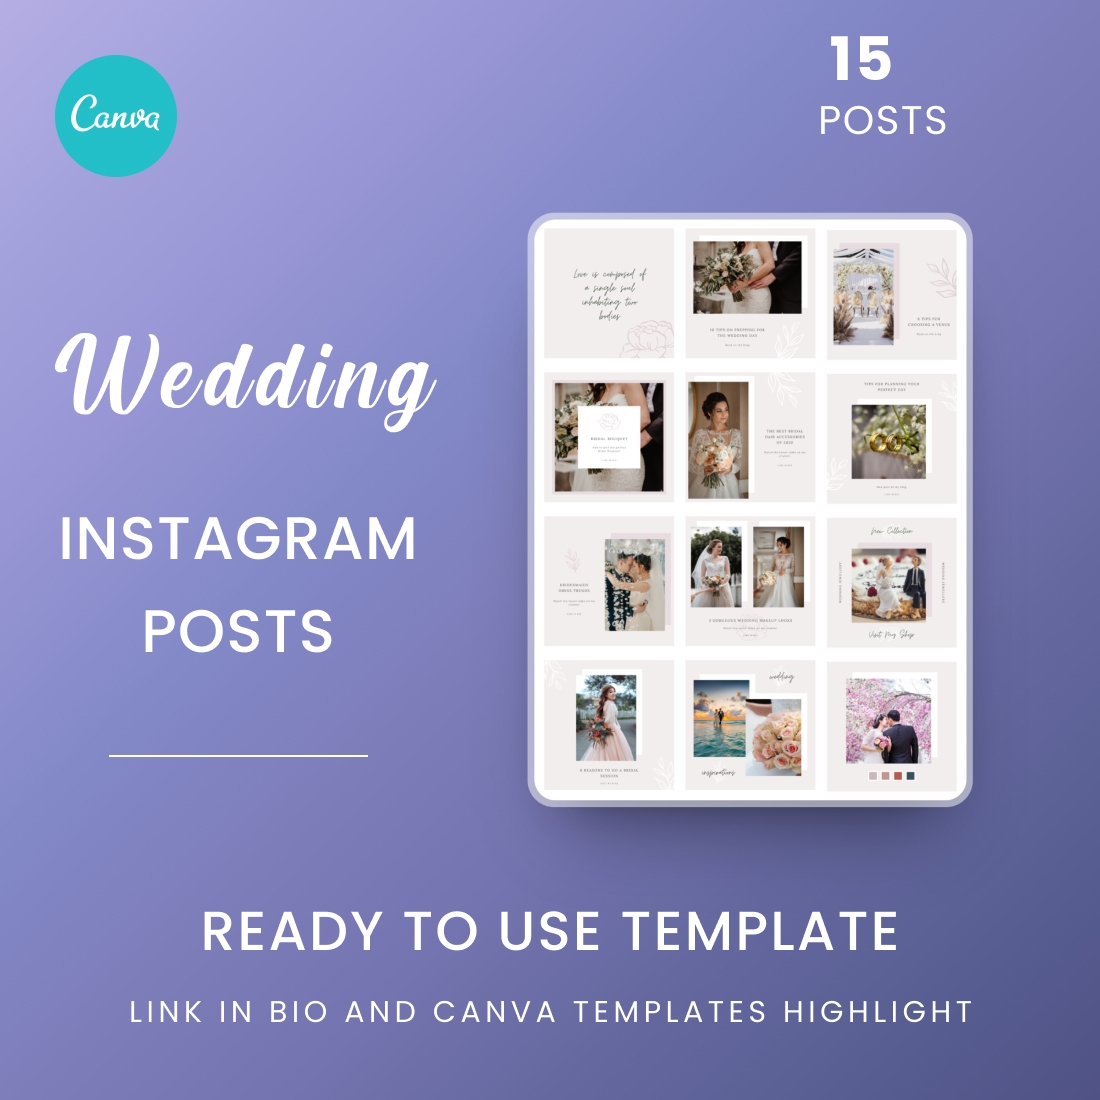 Modern Wedding Canva Template - 15 Instagram Posts cover image.